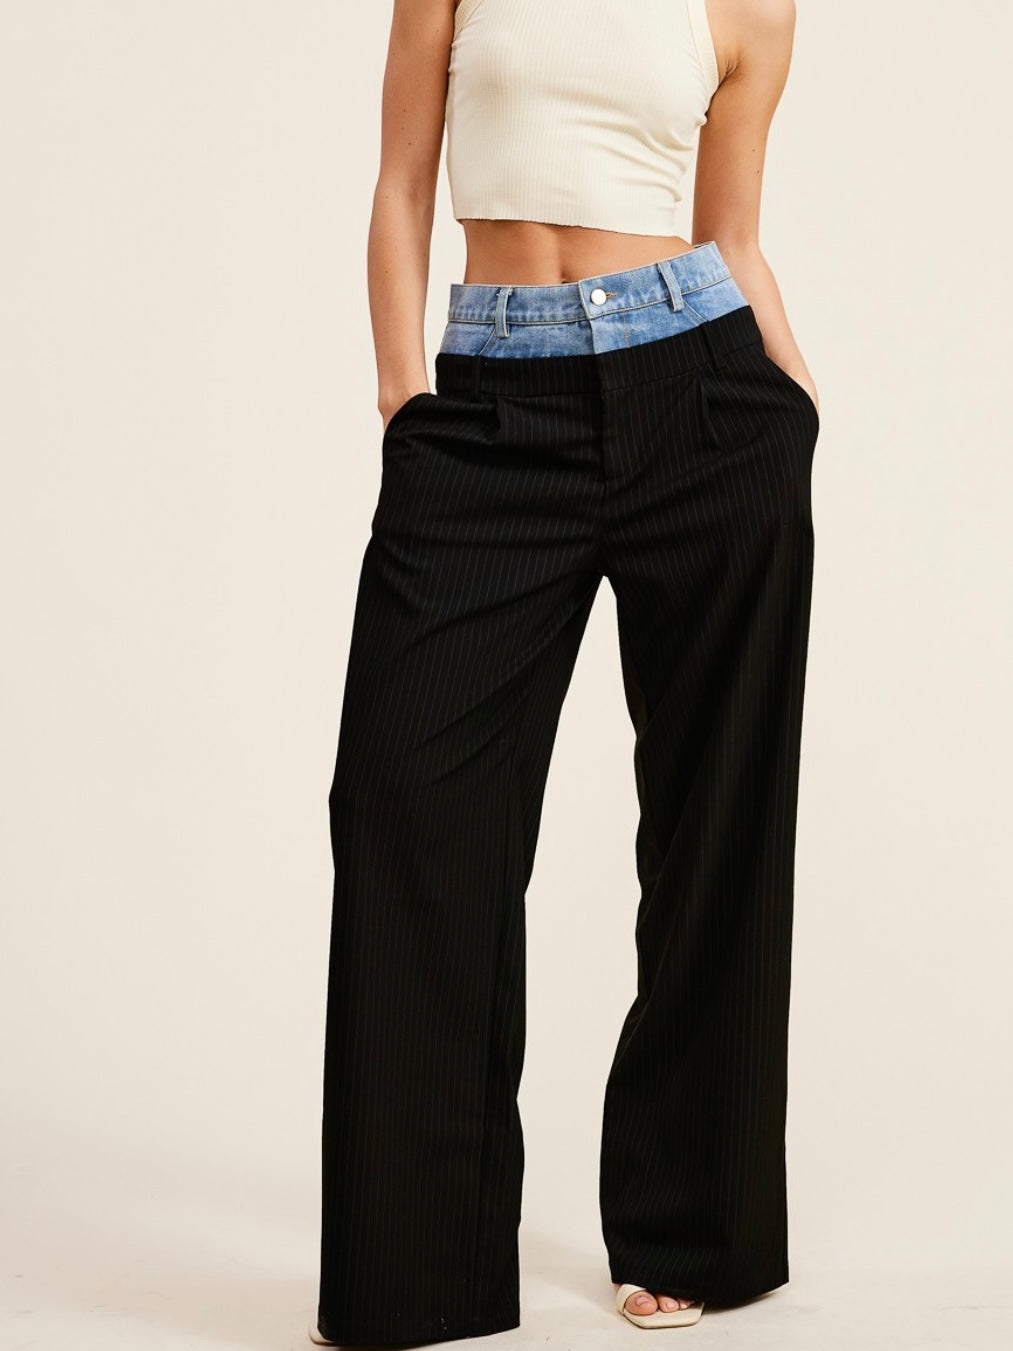 Preorder Blue jeans detail and black wide leg pants